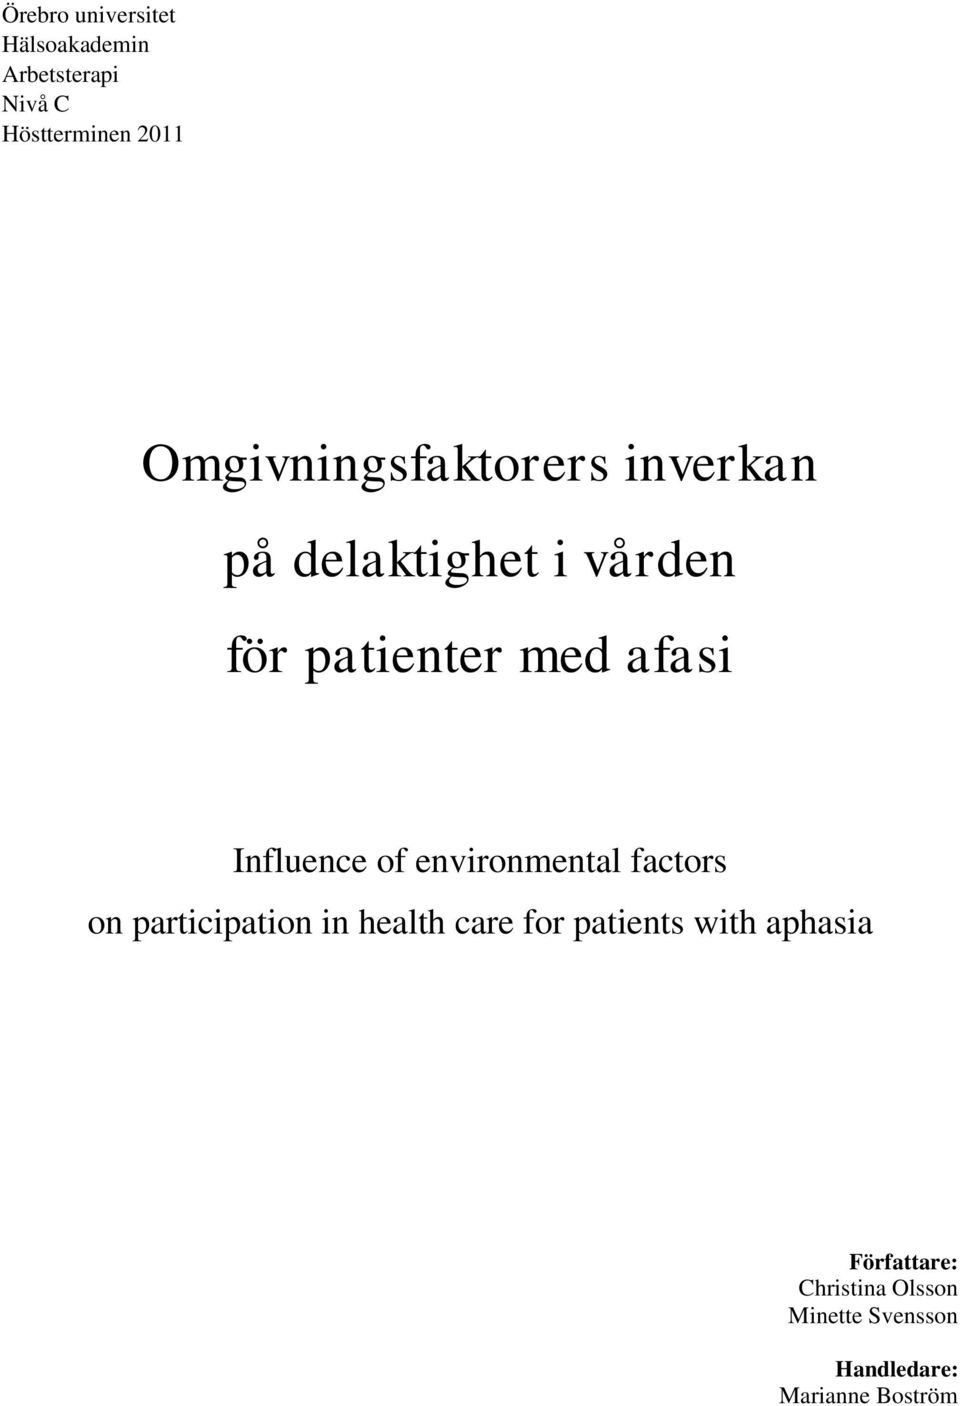 Influence of environmental factors on participation in health care for